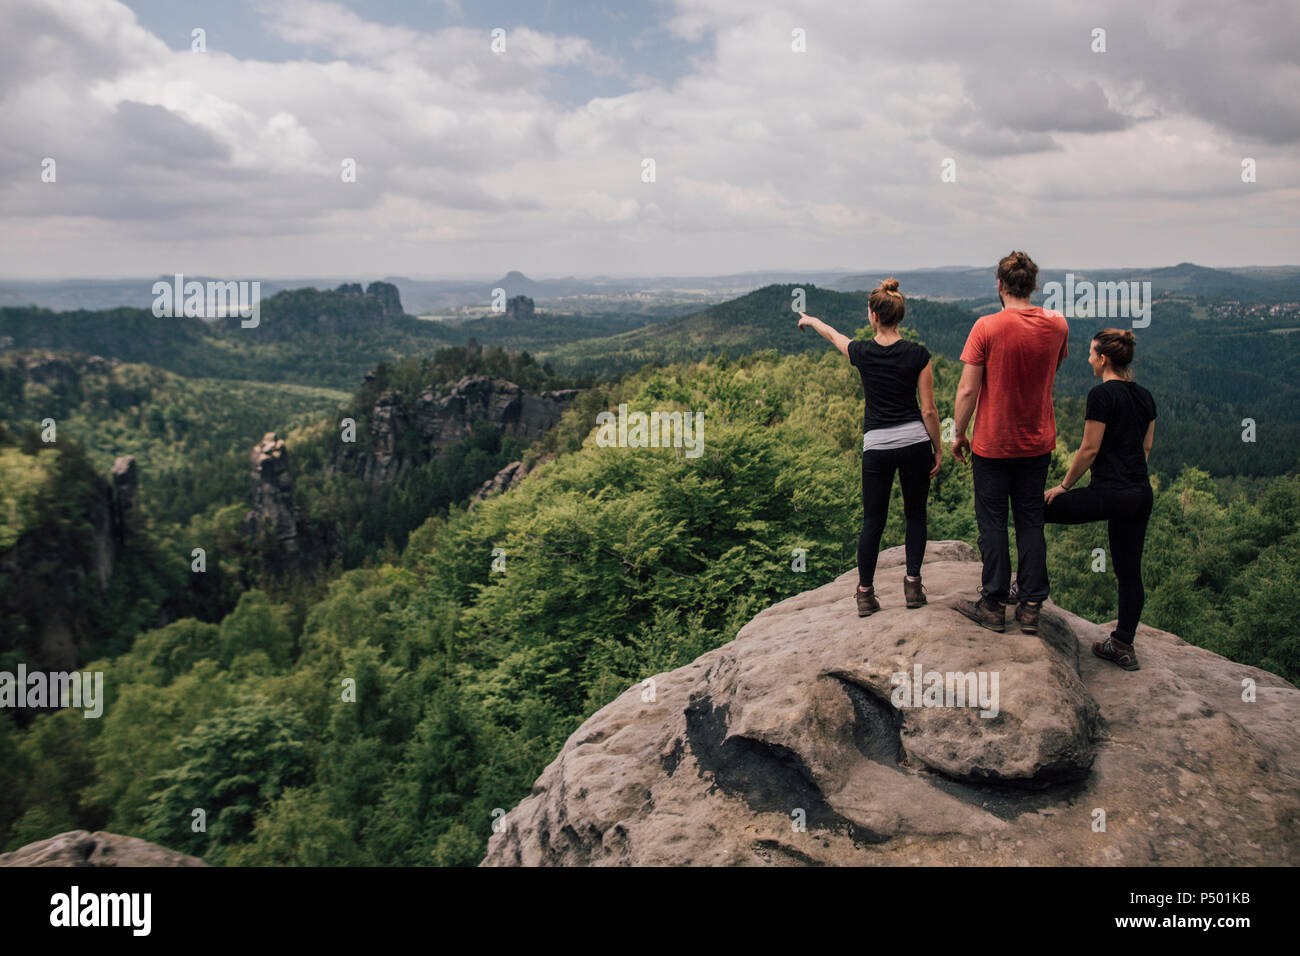 Germany, Saxony, Elbe Sandstone Mountains, friends on a hiking trip standing on rock Stock Photo